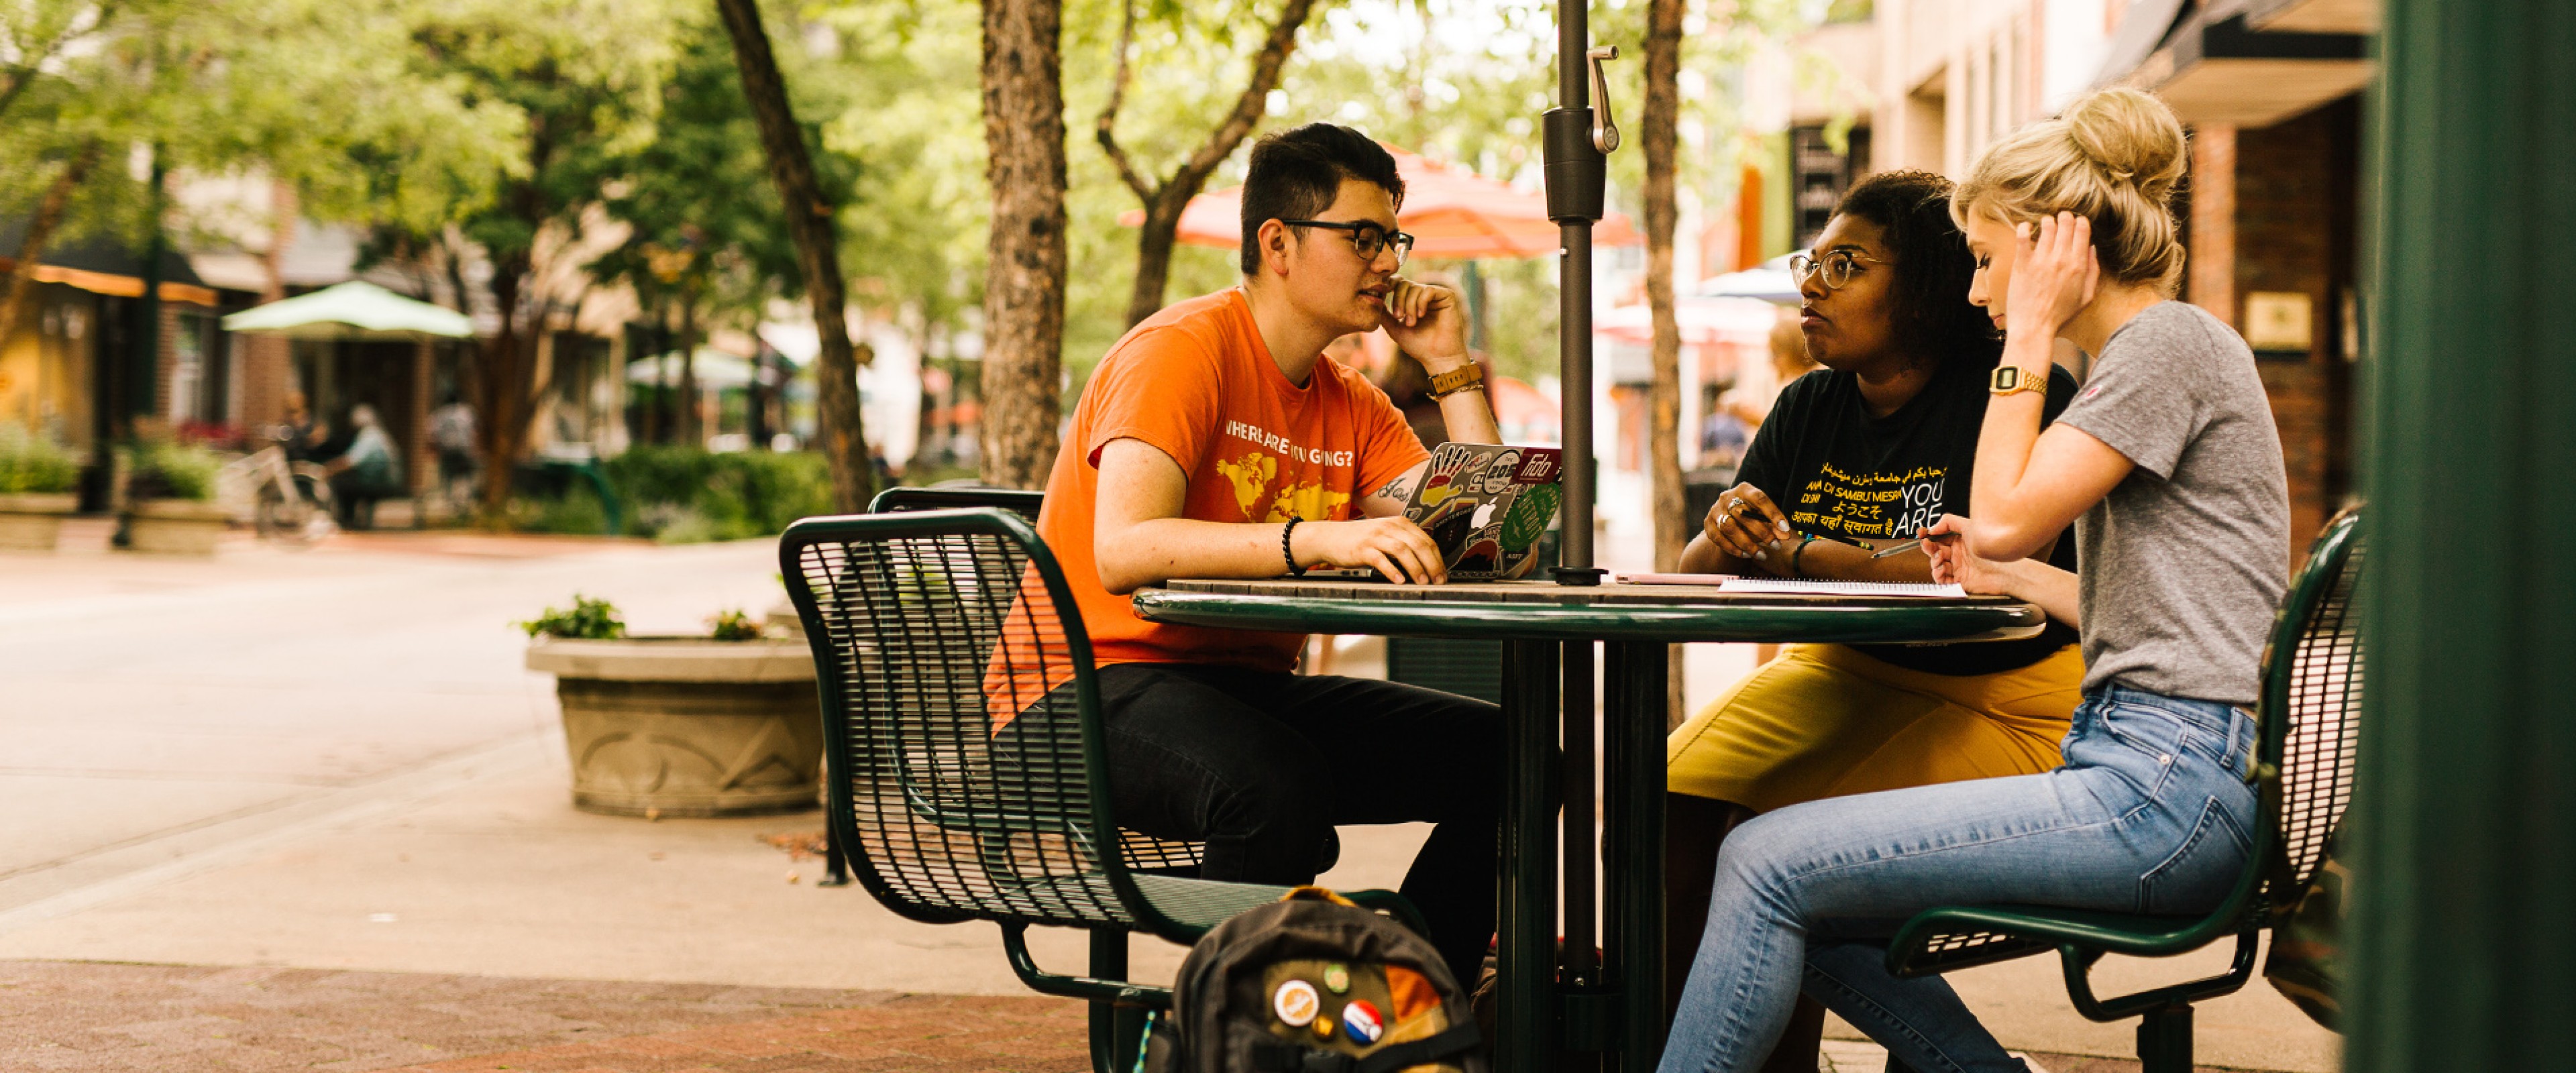 3 students sitting at an outdoor table in downtown Kalamazoo